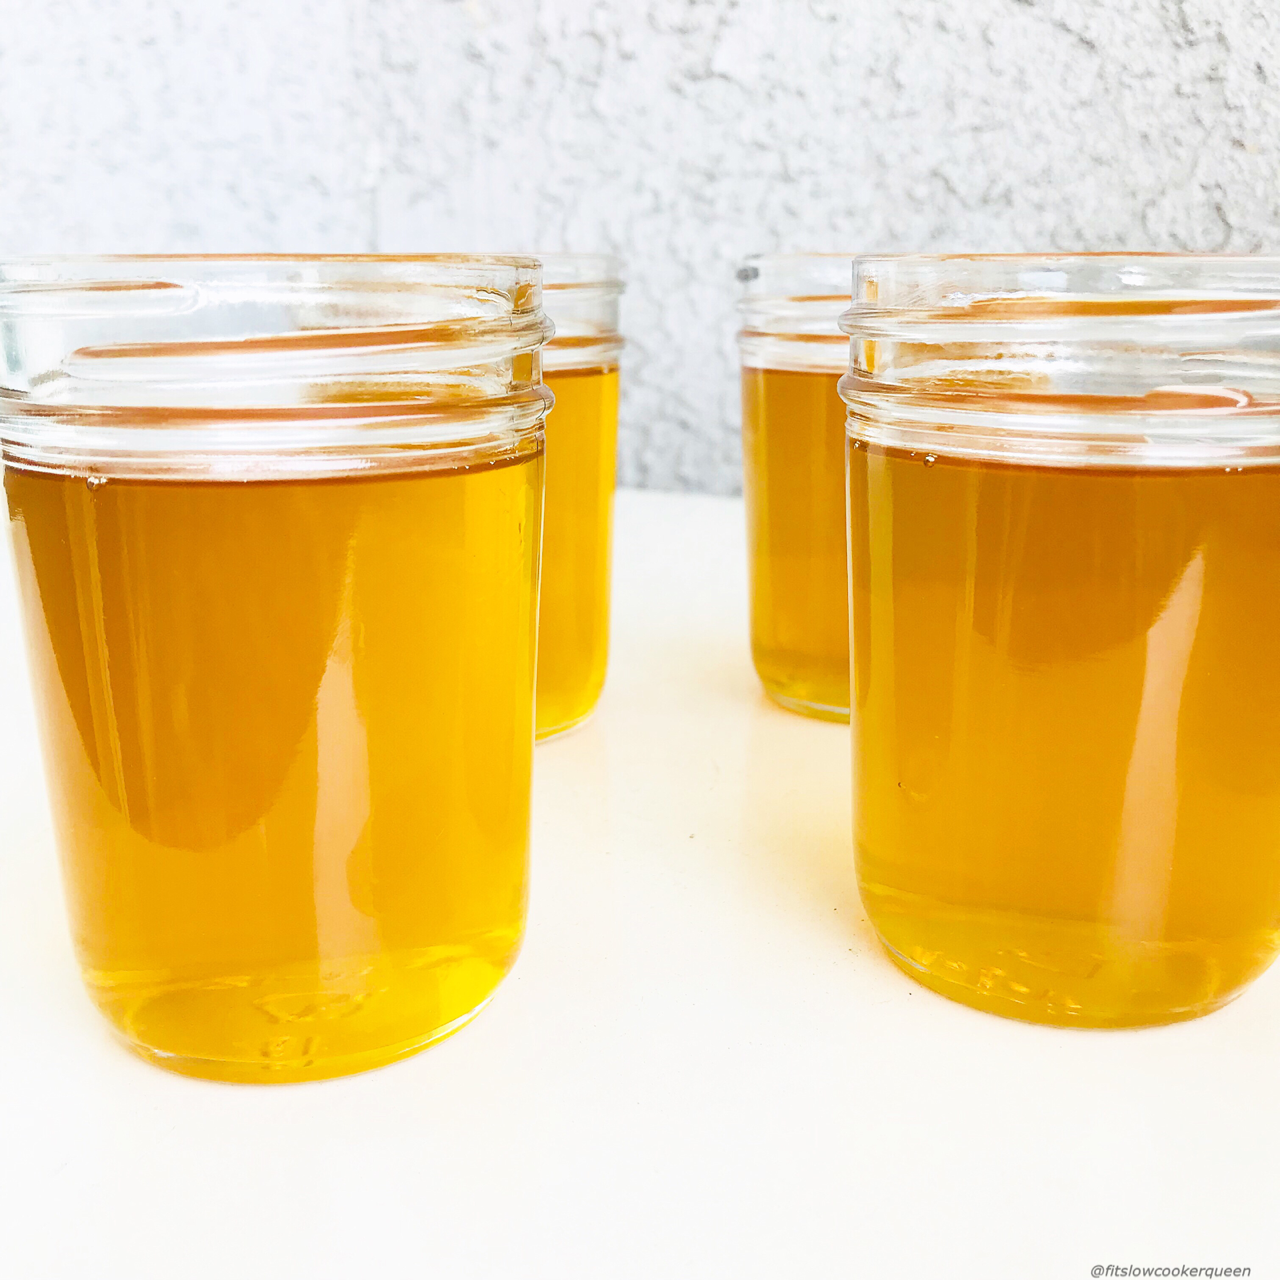 Ghee is clarified butter; butter that has been heated to remove the solids, water, and lactose. Ghee is all the rage now being a popular, healthy fat to use when cooking in diets like keto, paleo, and whole30. Store-bought ghee can be expensive; making your own using your slow cooker is not only easy but cheaper too.